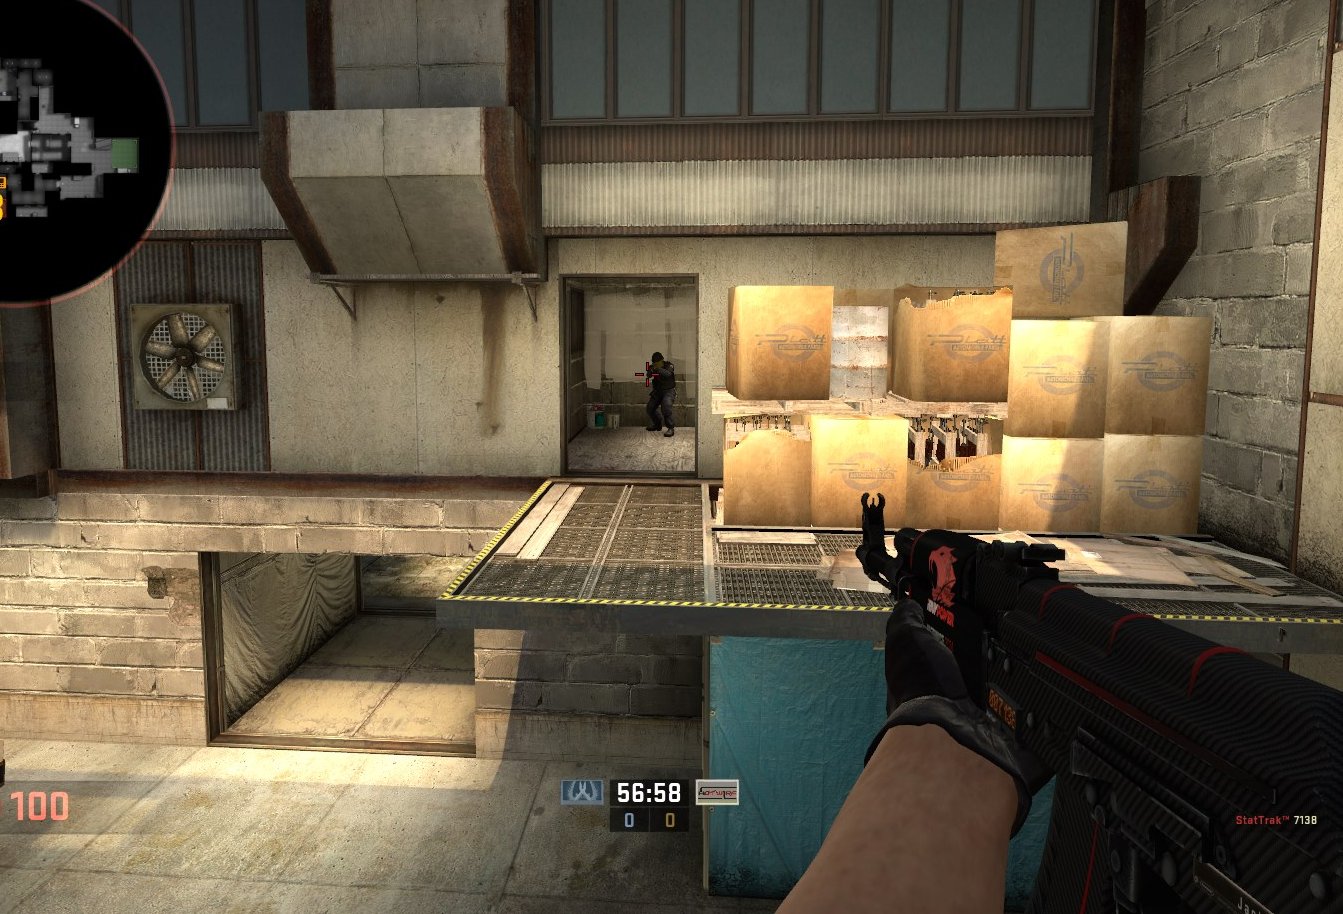 counter strike global offensive glitches